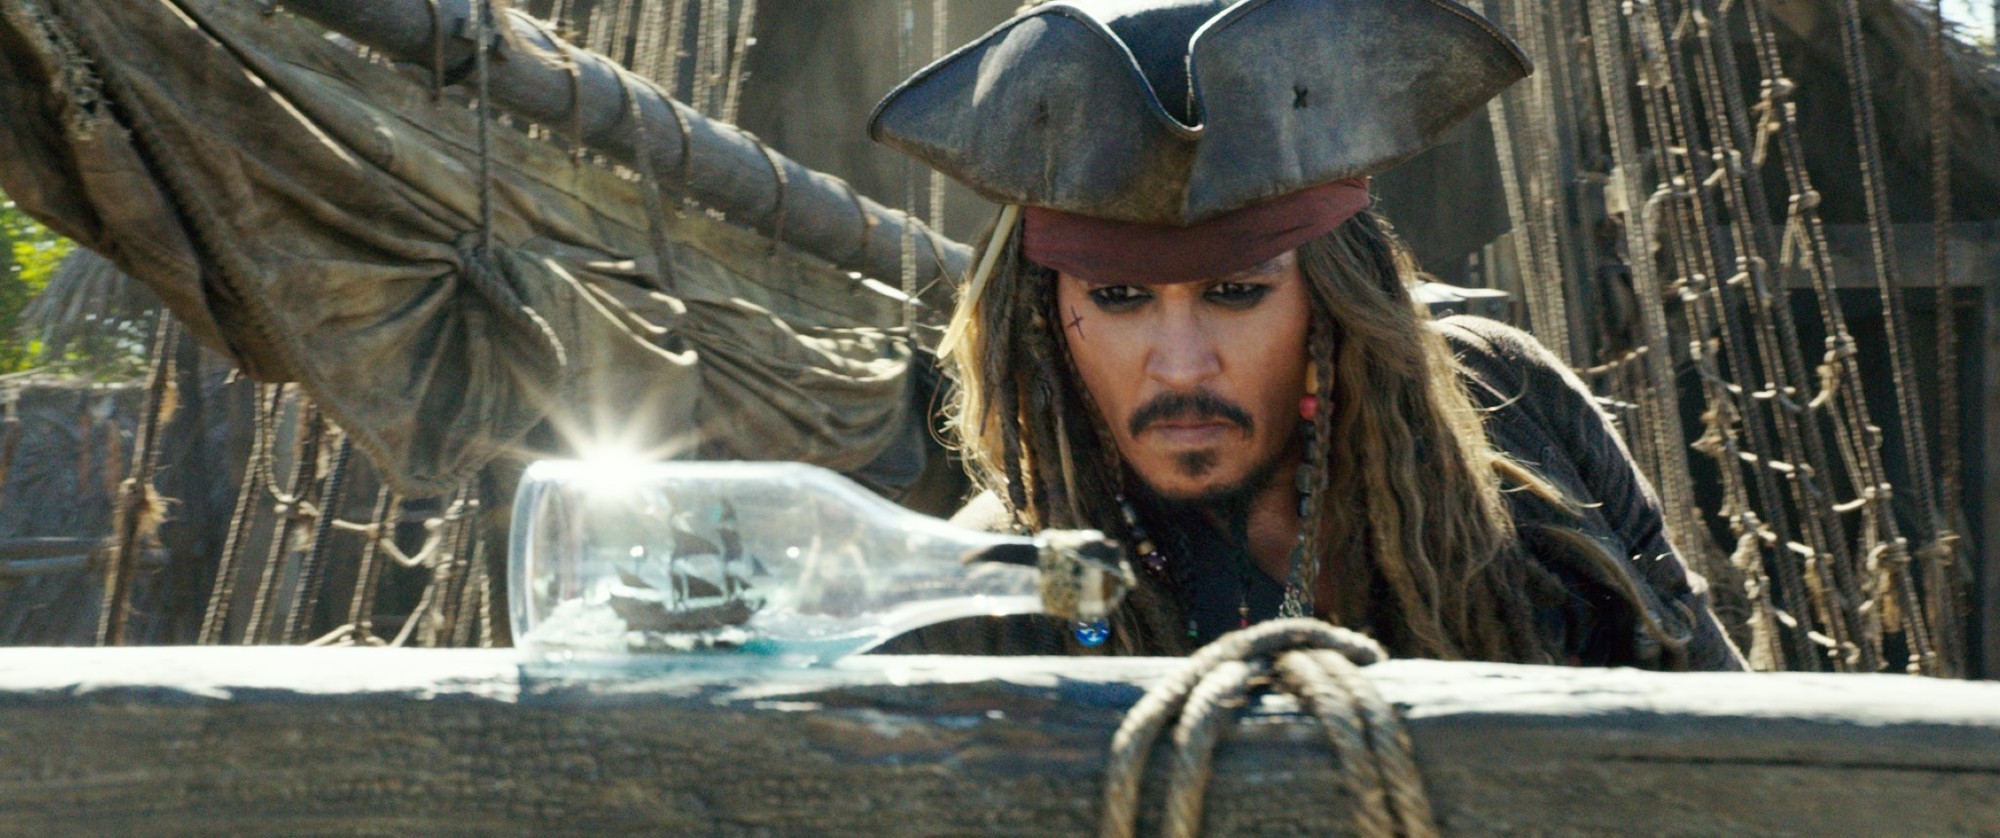 Johnny Depp stars as Captain Jack Sparrow in Walt Disney Pictures' Pirates of the Caribbean: Dead Men Tell No Tales (2017)